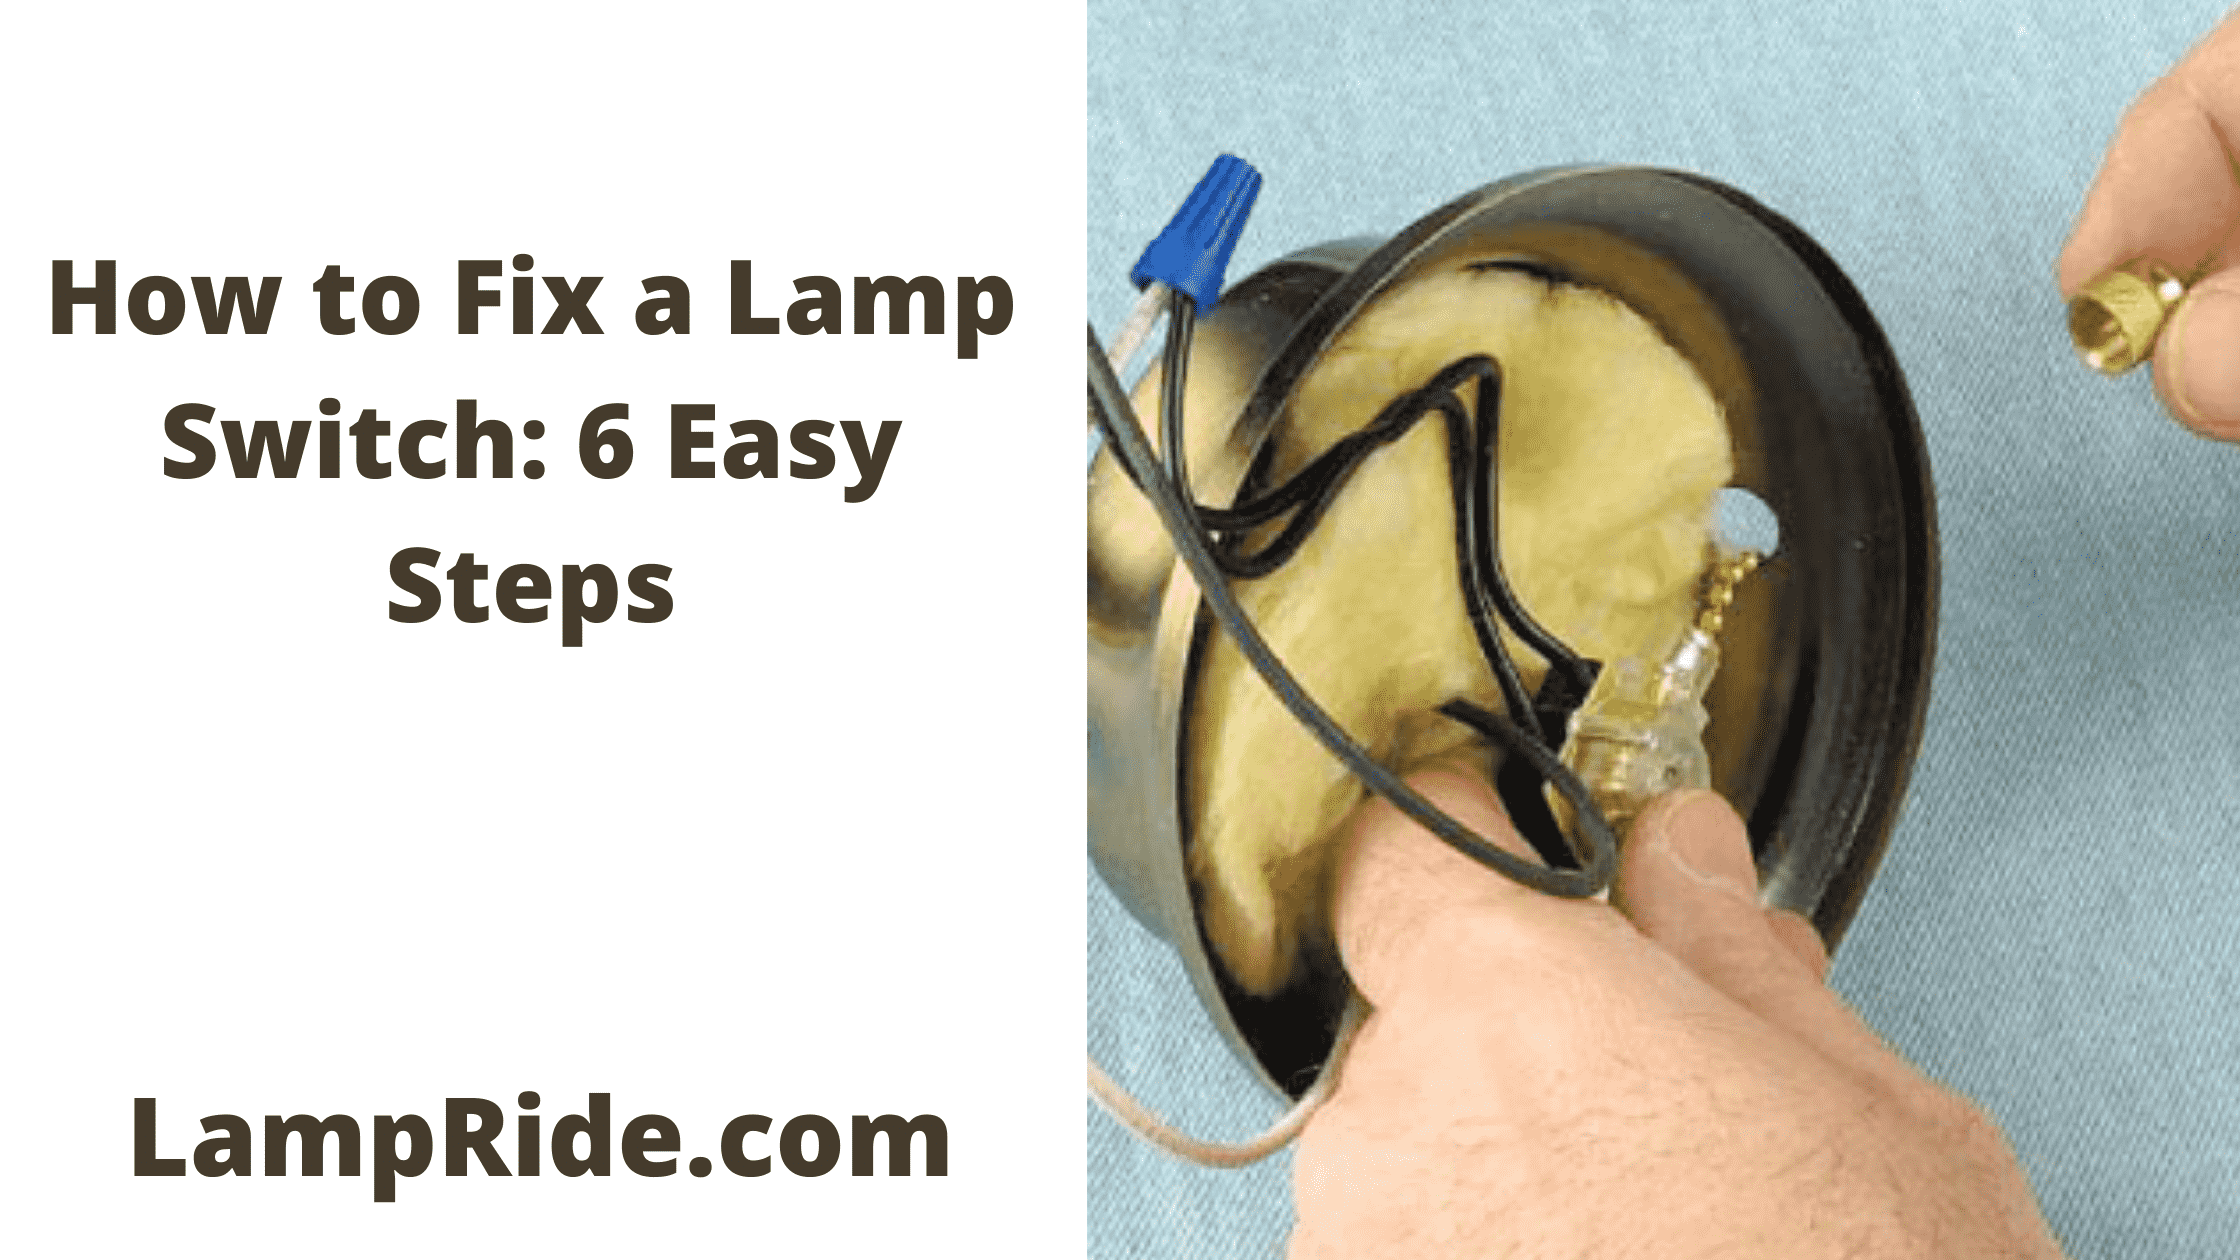 How to Fix a Lamp Switch